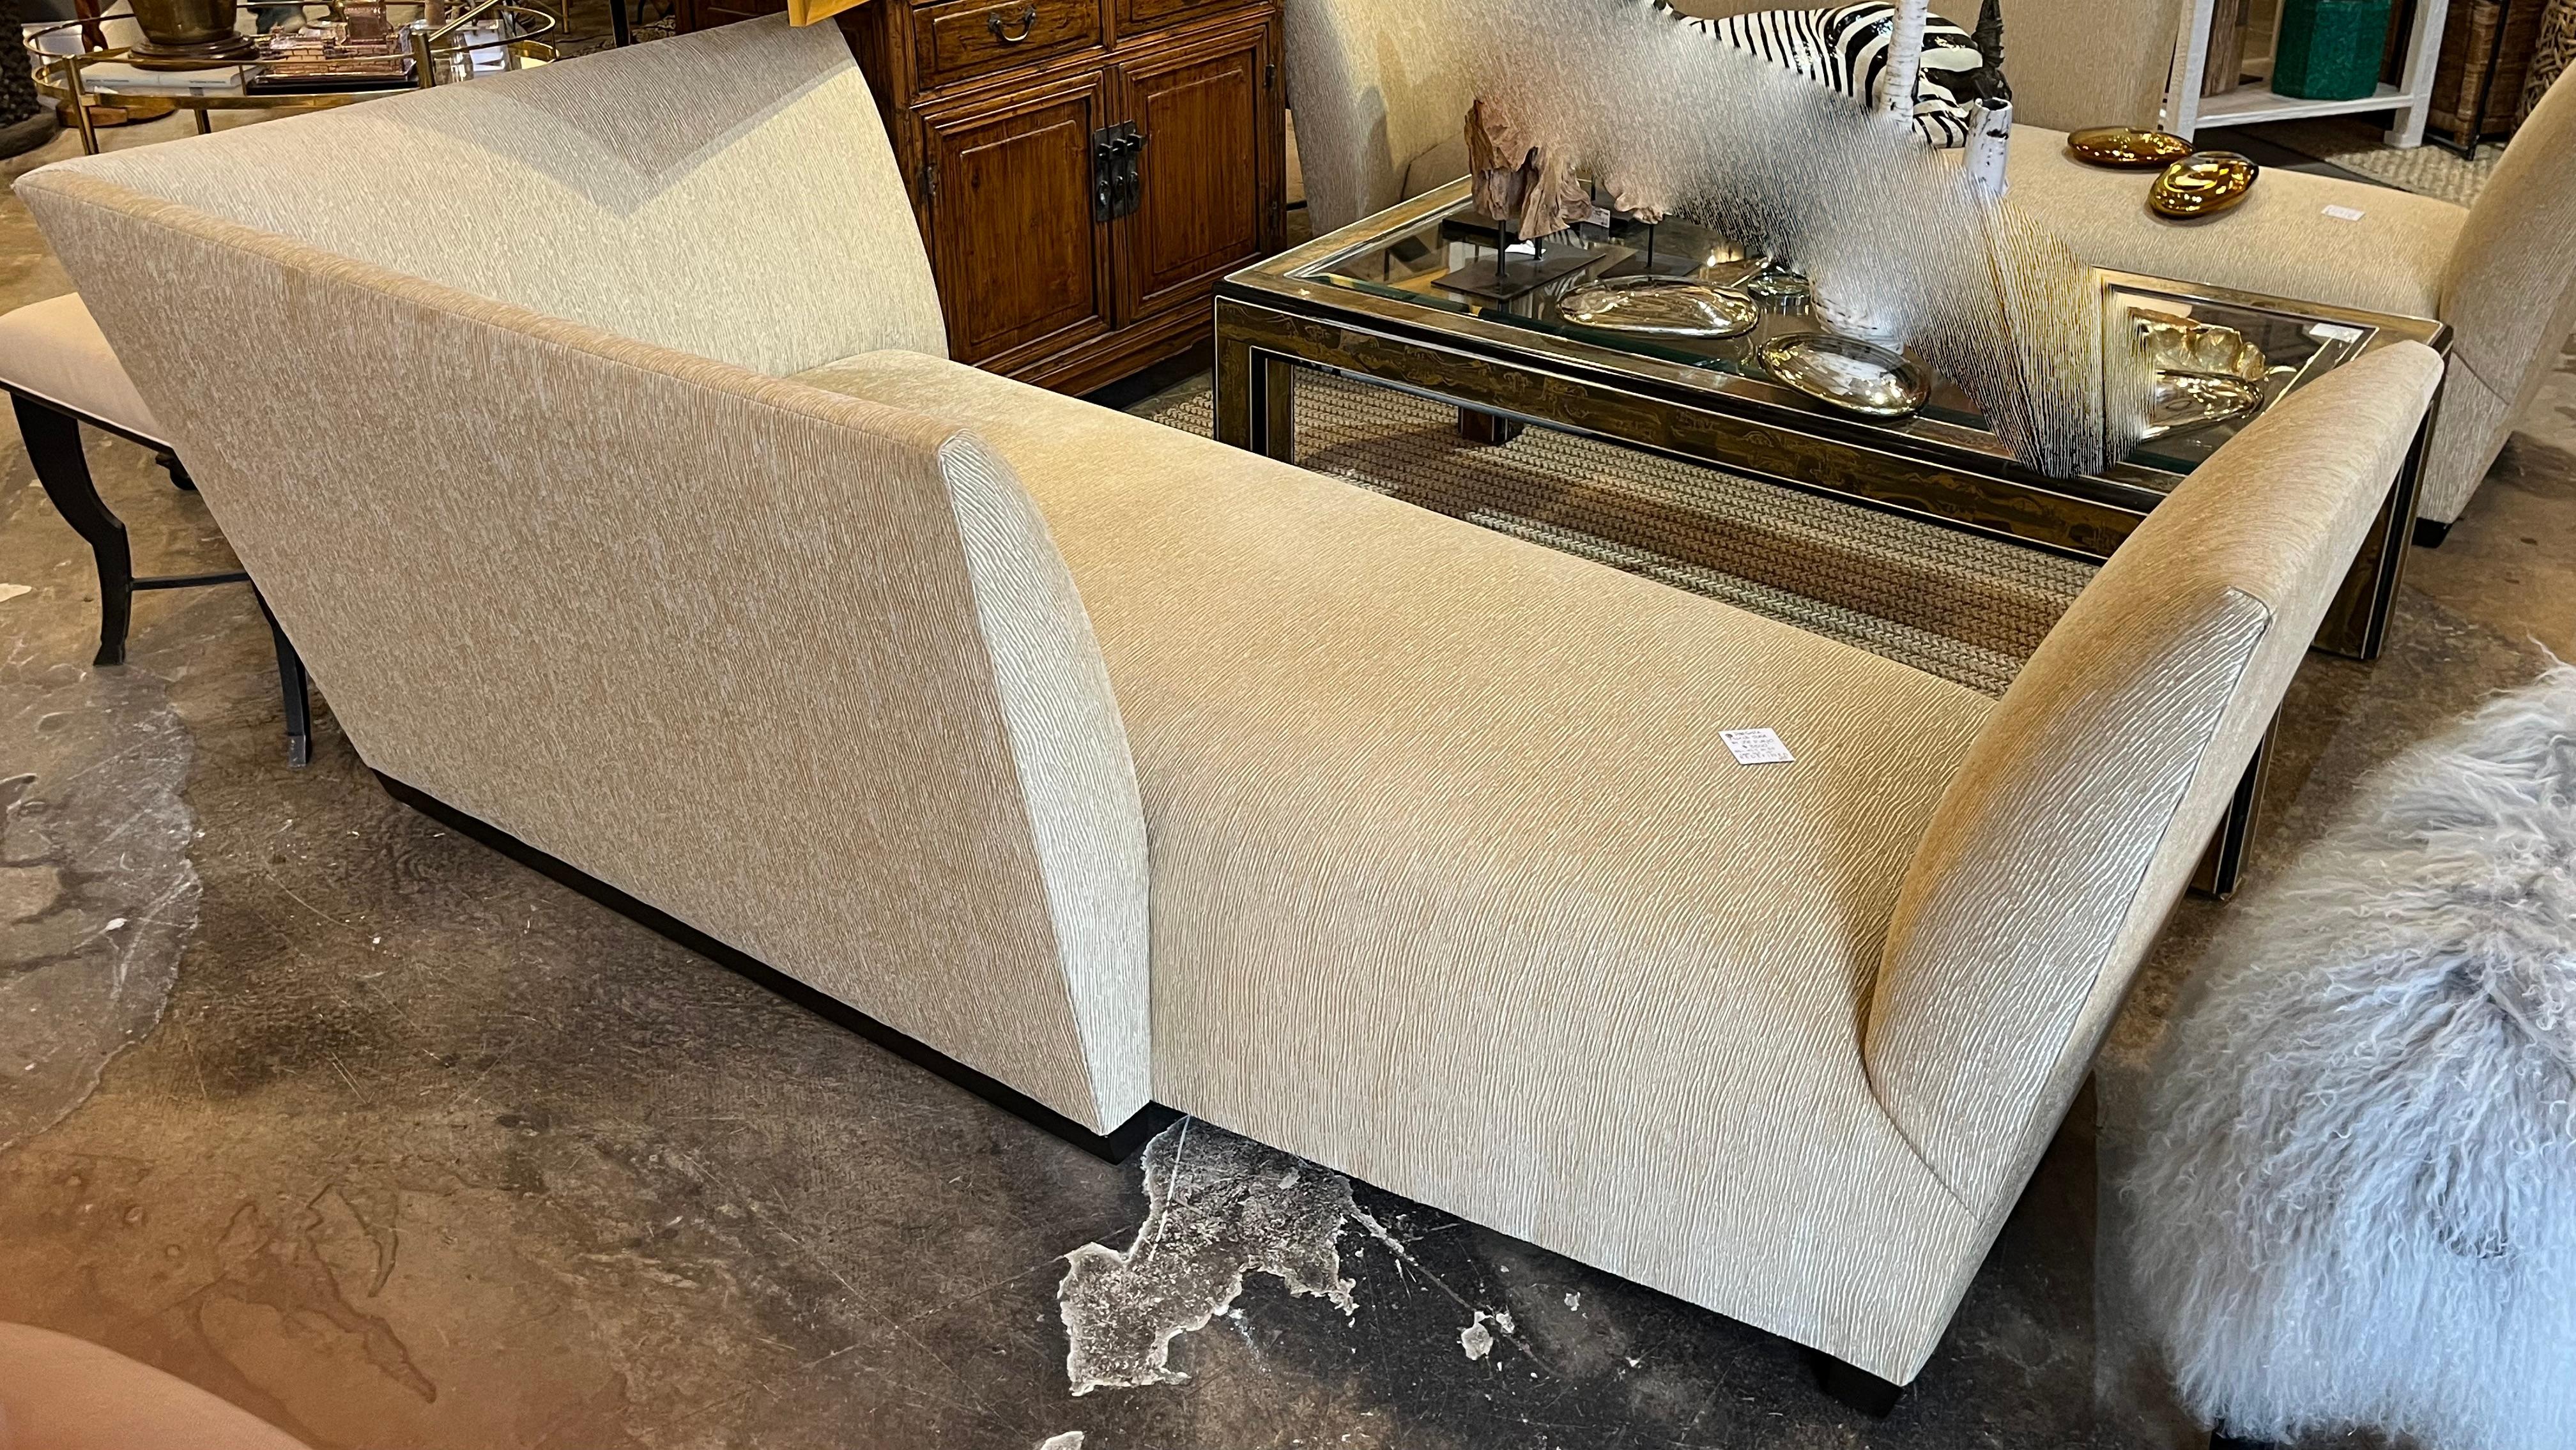 A pair of Donghia sculptural sofas designed by Joe D'urso having soft ecru chenille upholstery.